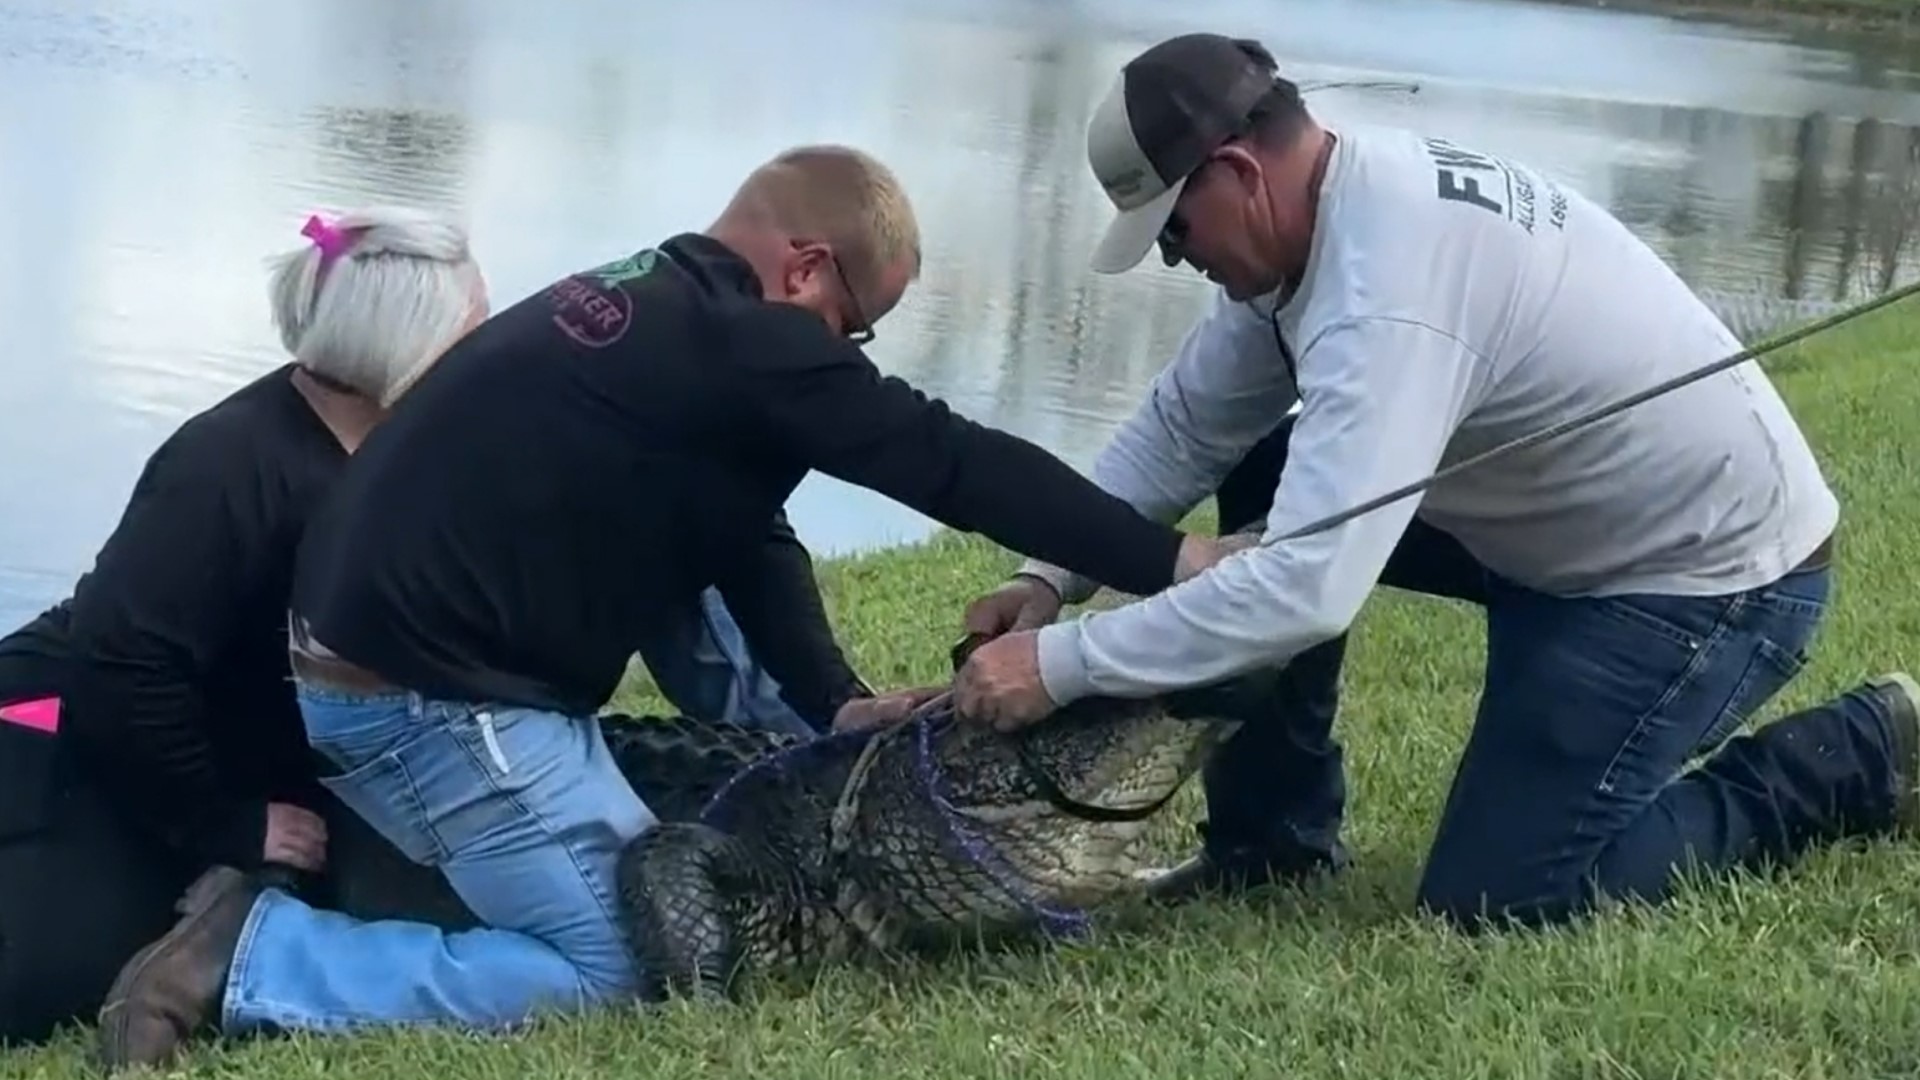 Investigators say the woman was walking her dog when a gator came out of the water and dragged her in.